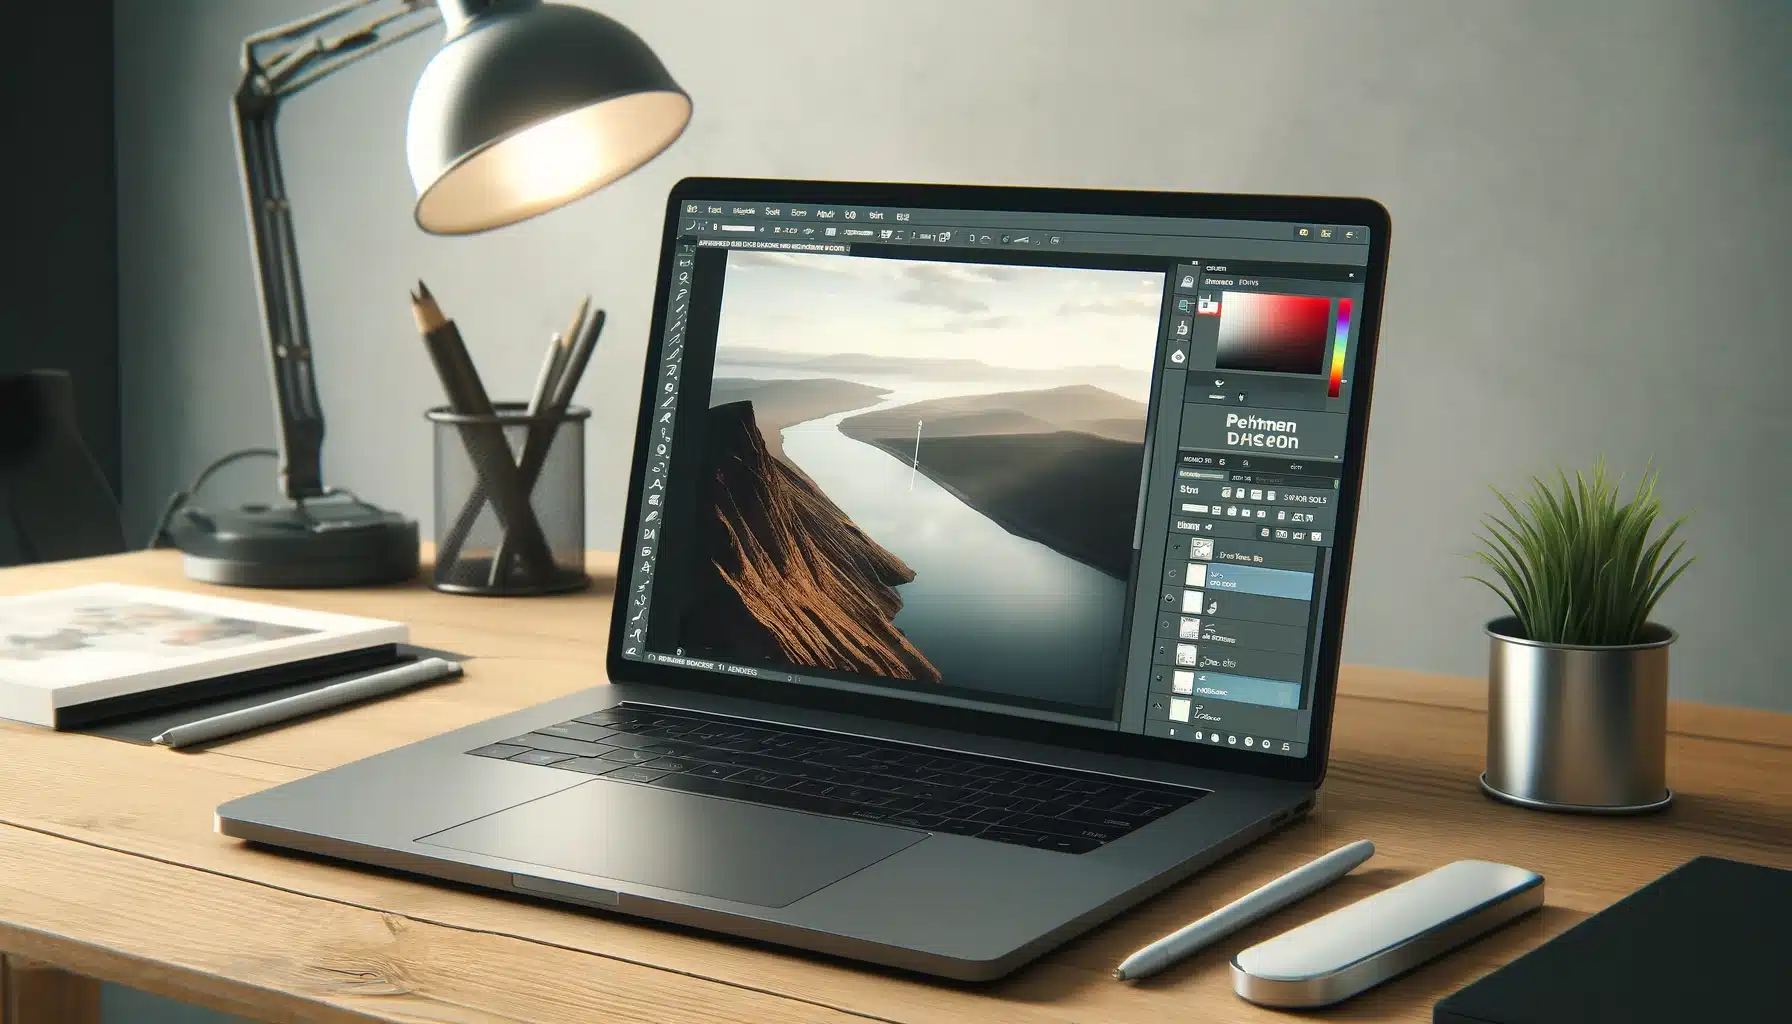 Laptop on a desk showing Photoshop's 'Sharpen' tool in action, with a split-screen comparison of a blurry and a sharp image, in a modern professional workspace.